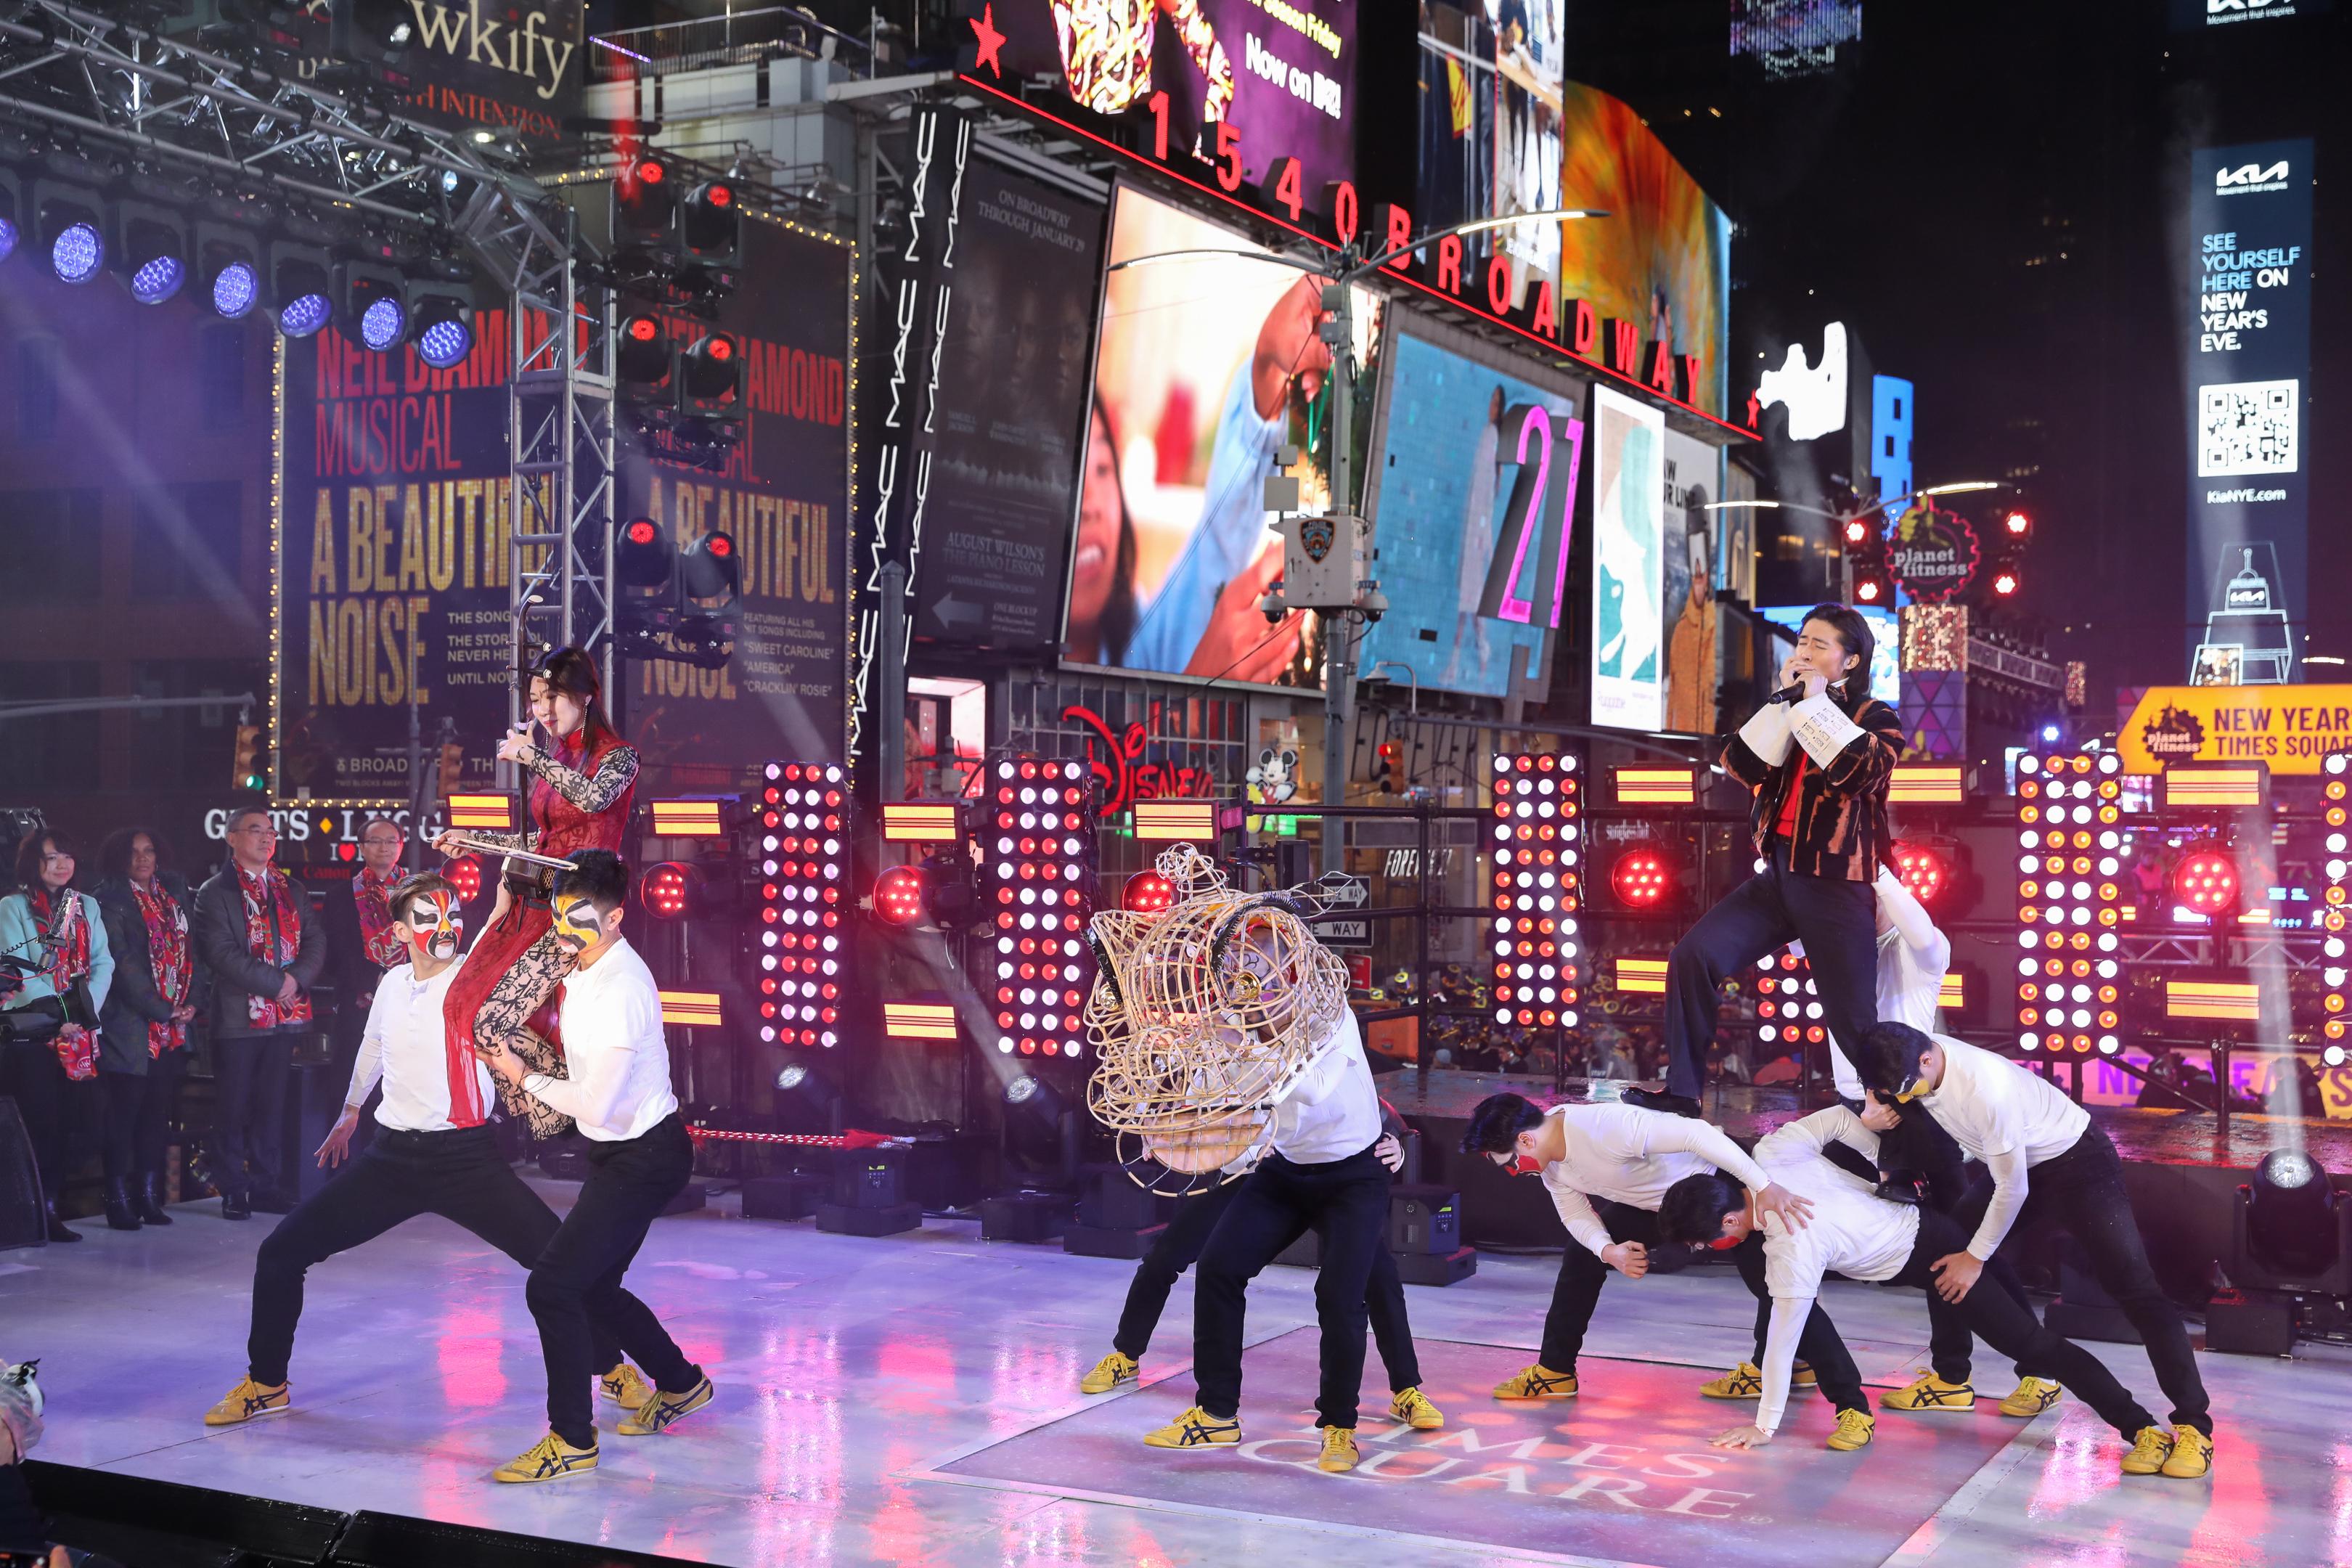 Hong Kong artists enthralled a worldwide audience by kicking off the New York Times Square countdown celebration with a "Kung Fu Contemporary Circus" on December 31, 2022 (New York time). 